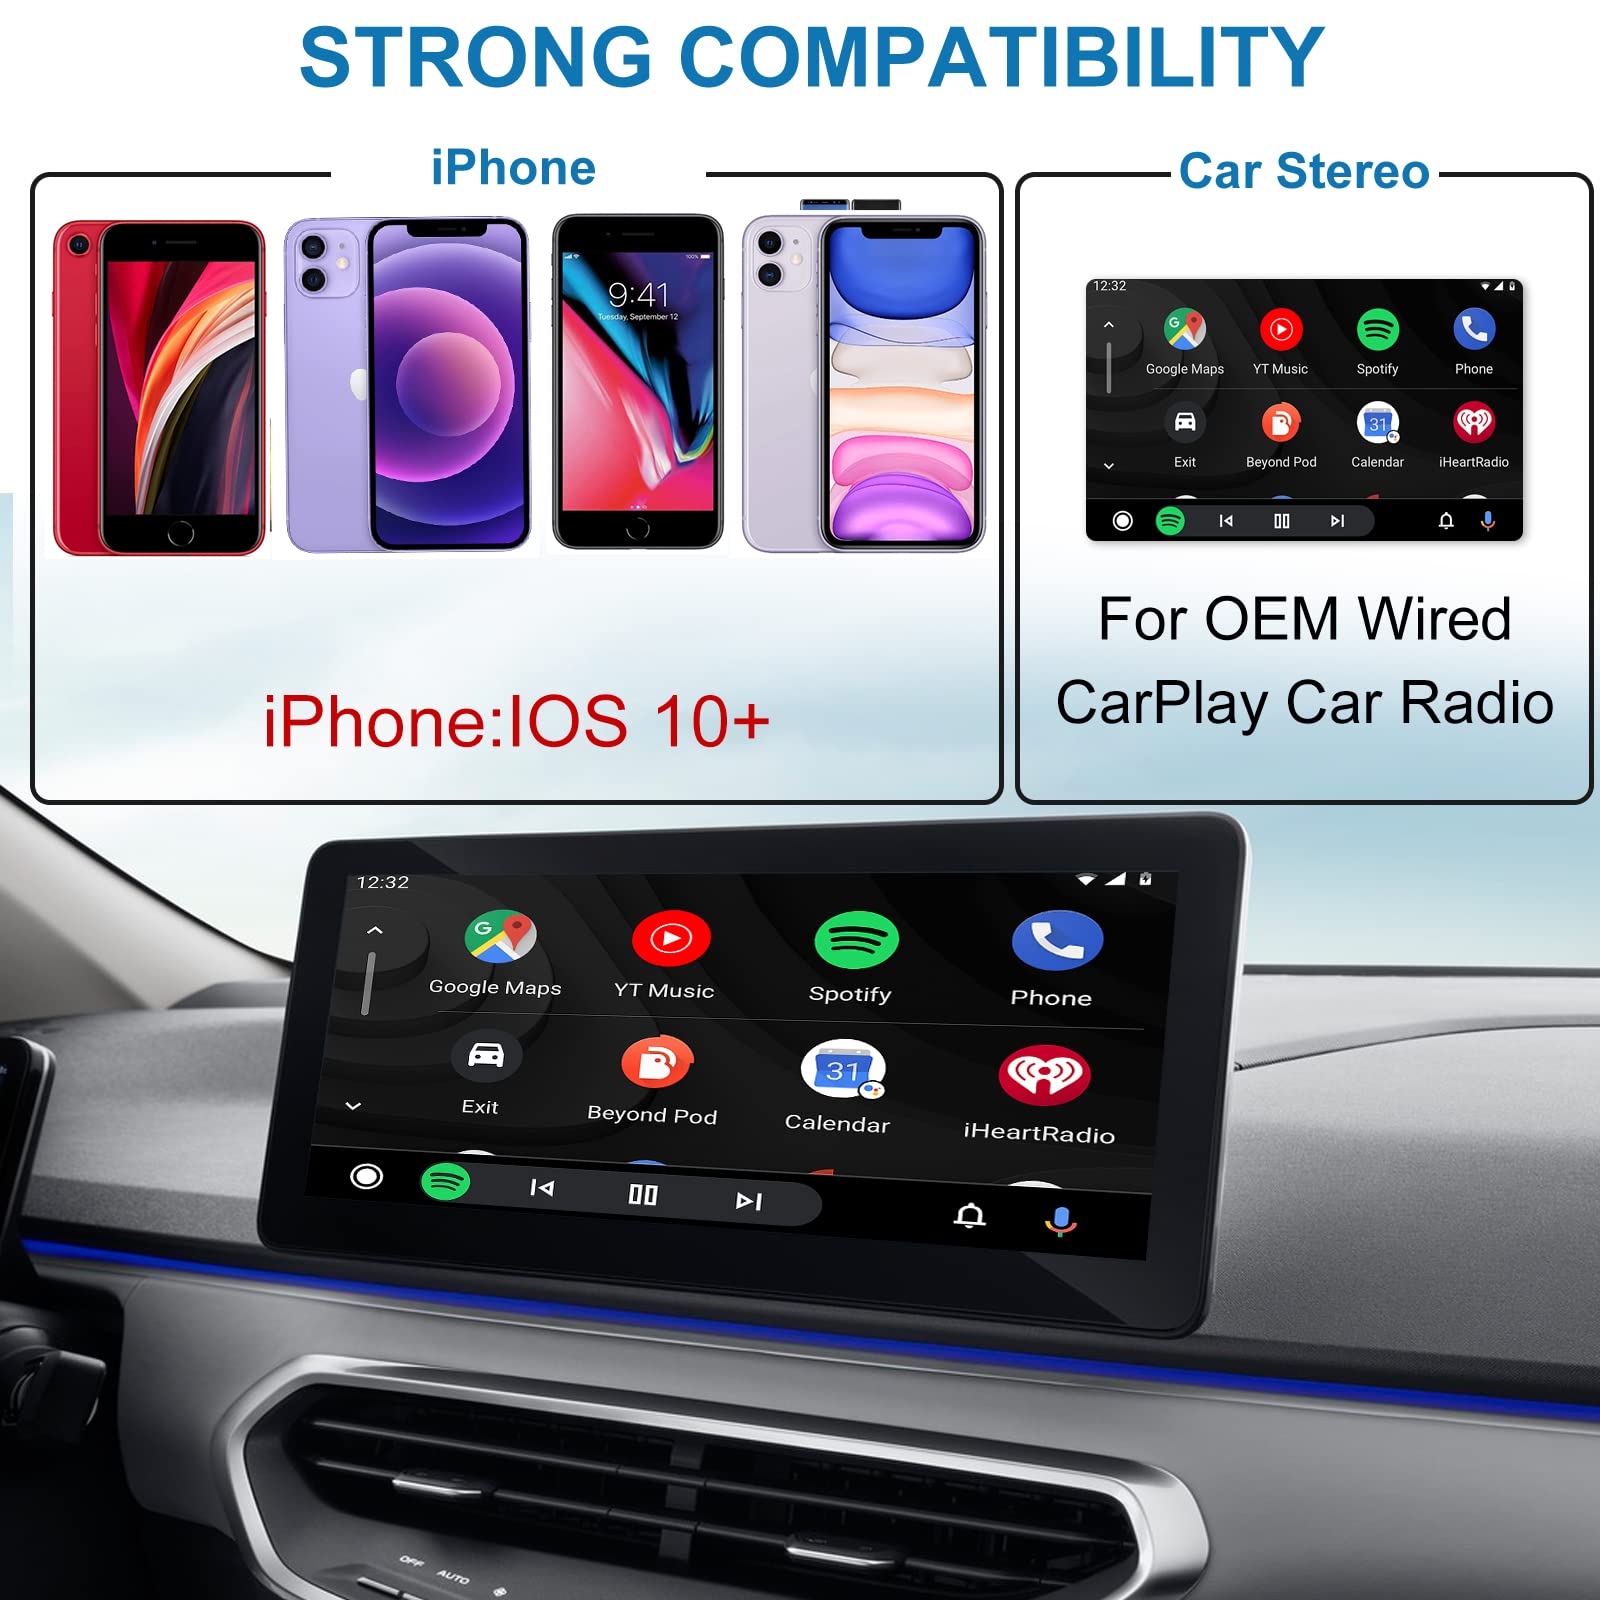 CARLIET Wireless CarPlay Adapter, Wireless Car Dongle for OEM Wired Apple CarPlay Cars from 2015, Support Online Update, Plug & Play